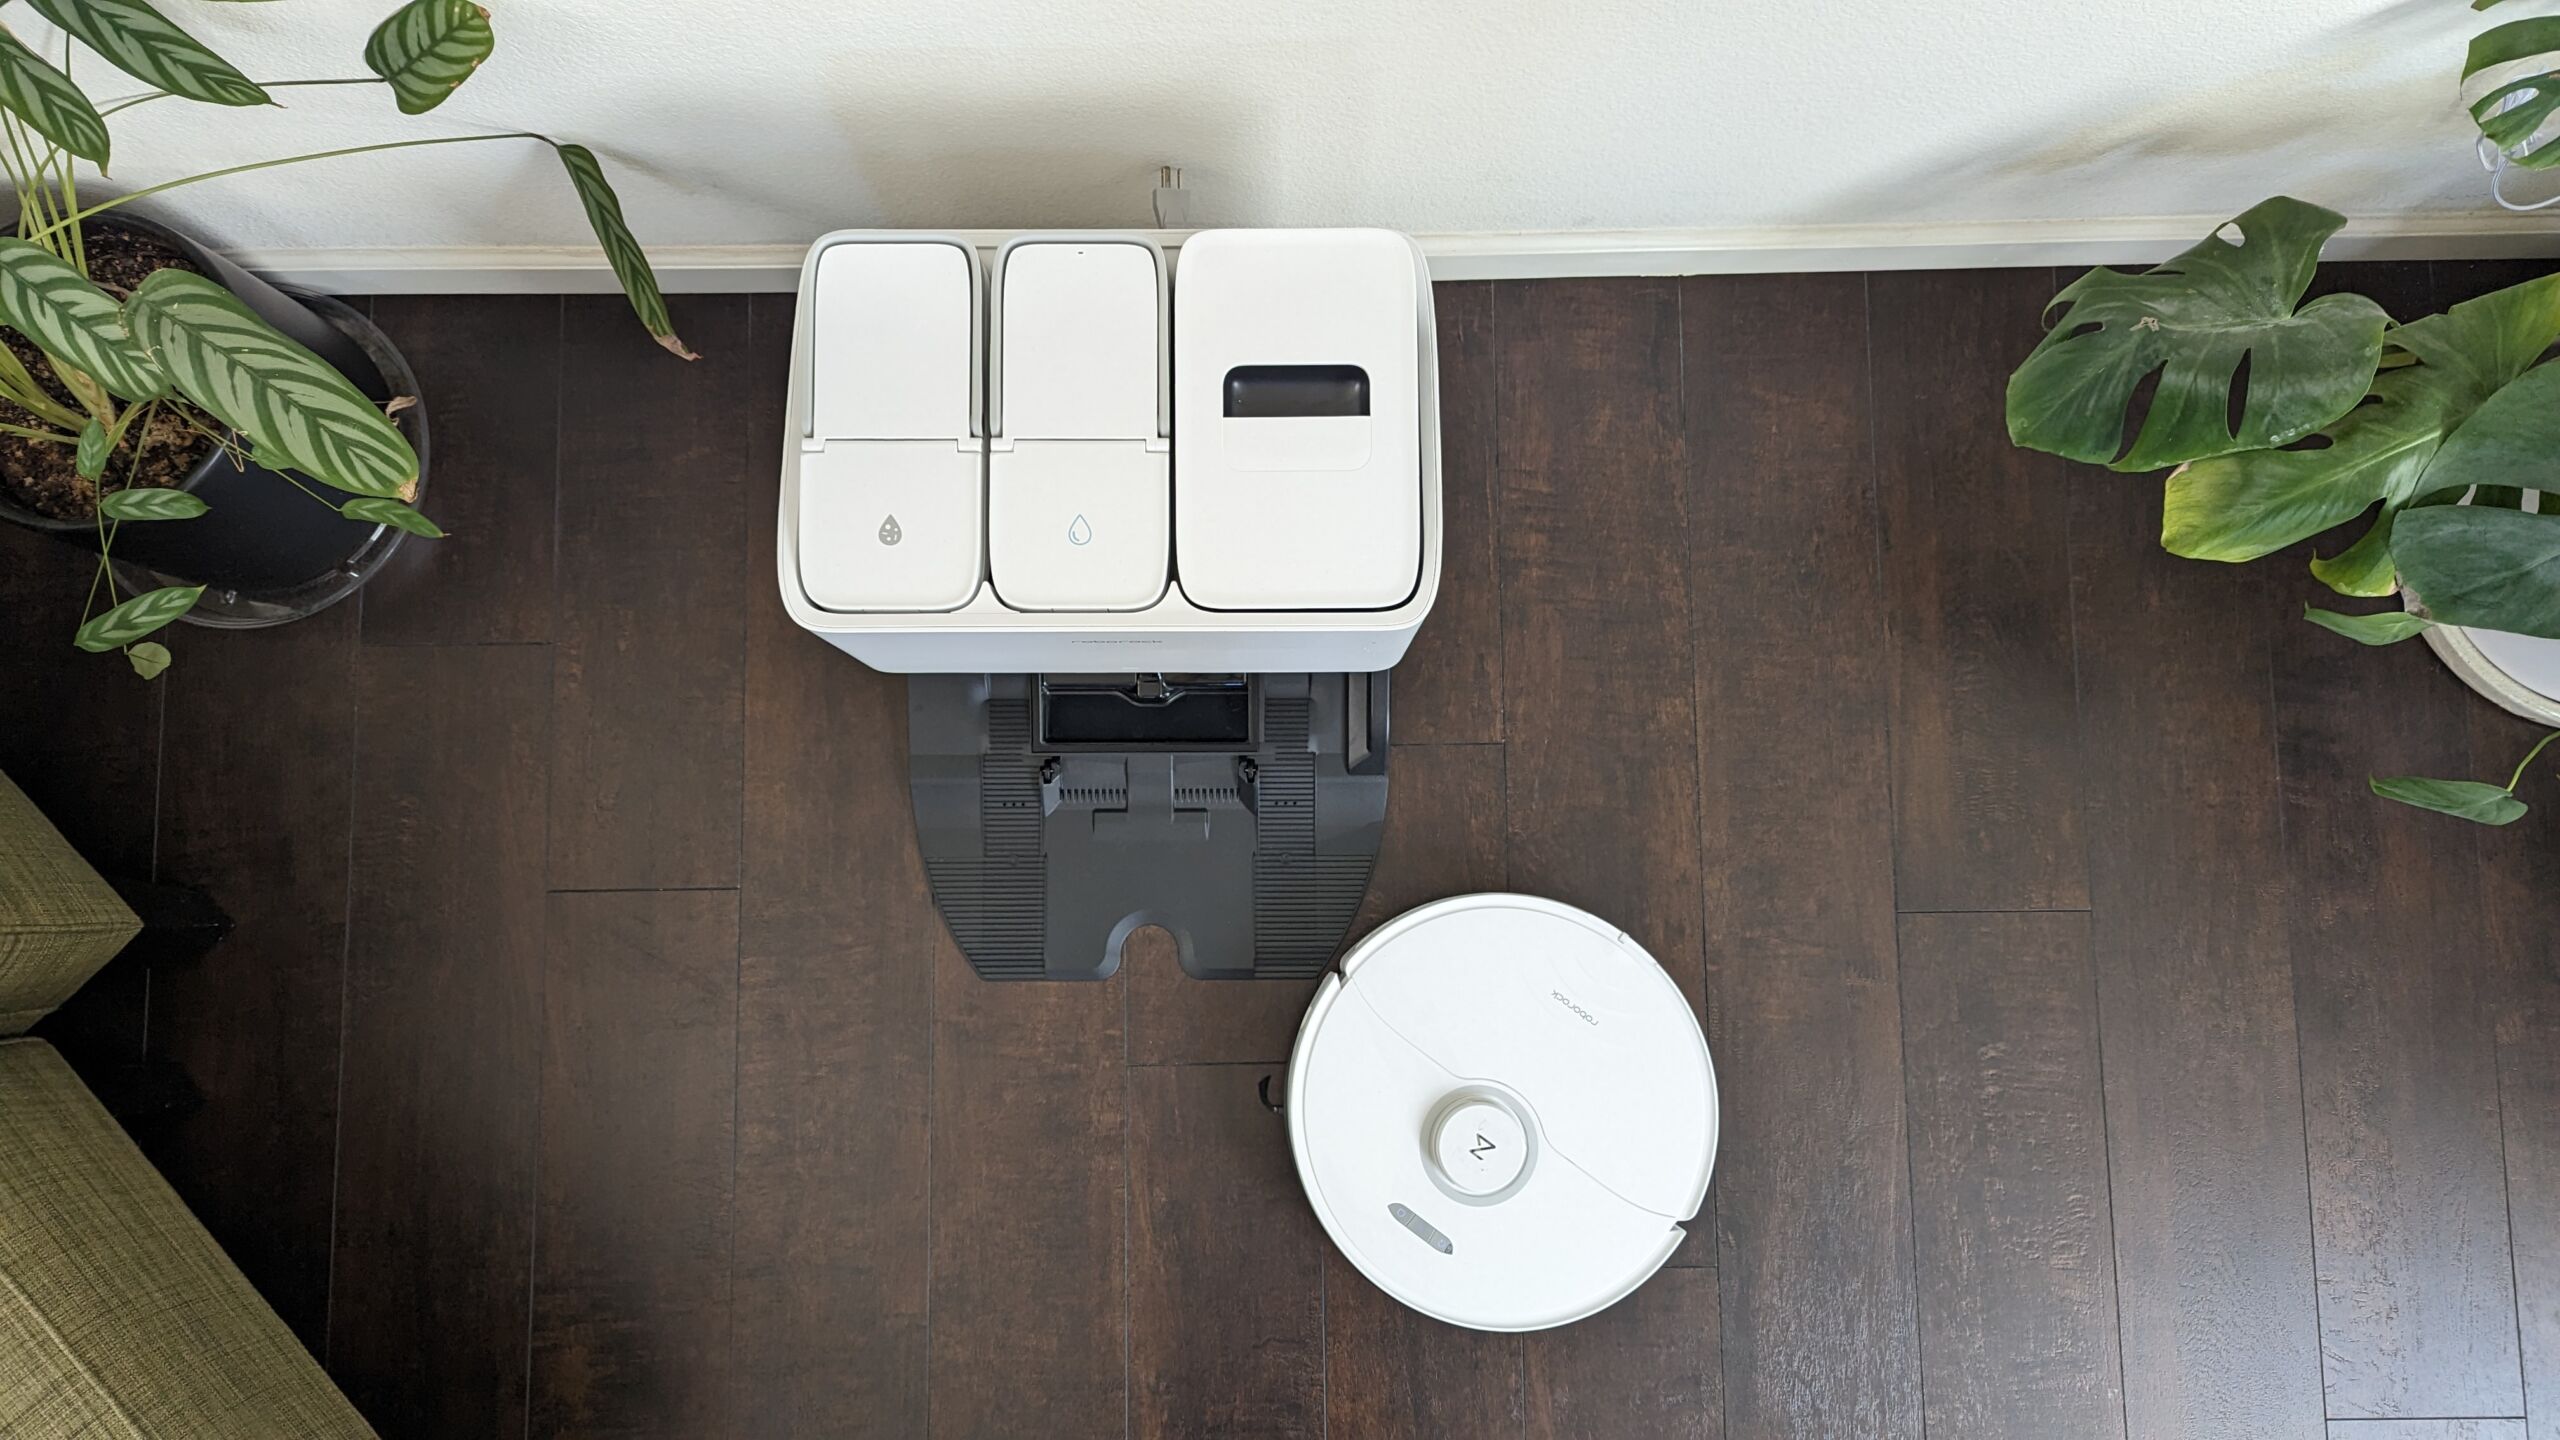 Roborock S8 Pro Ultra makes cleaning effortless this spring